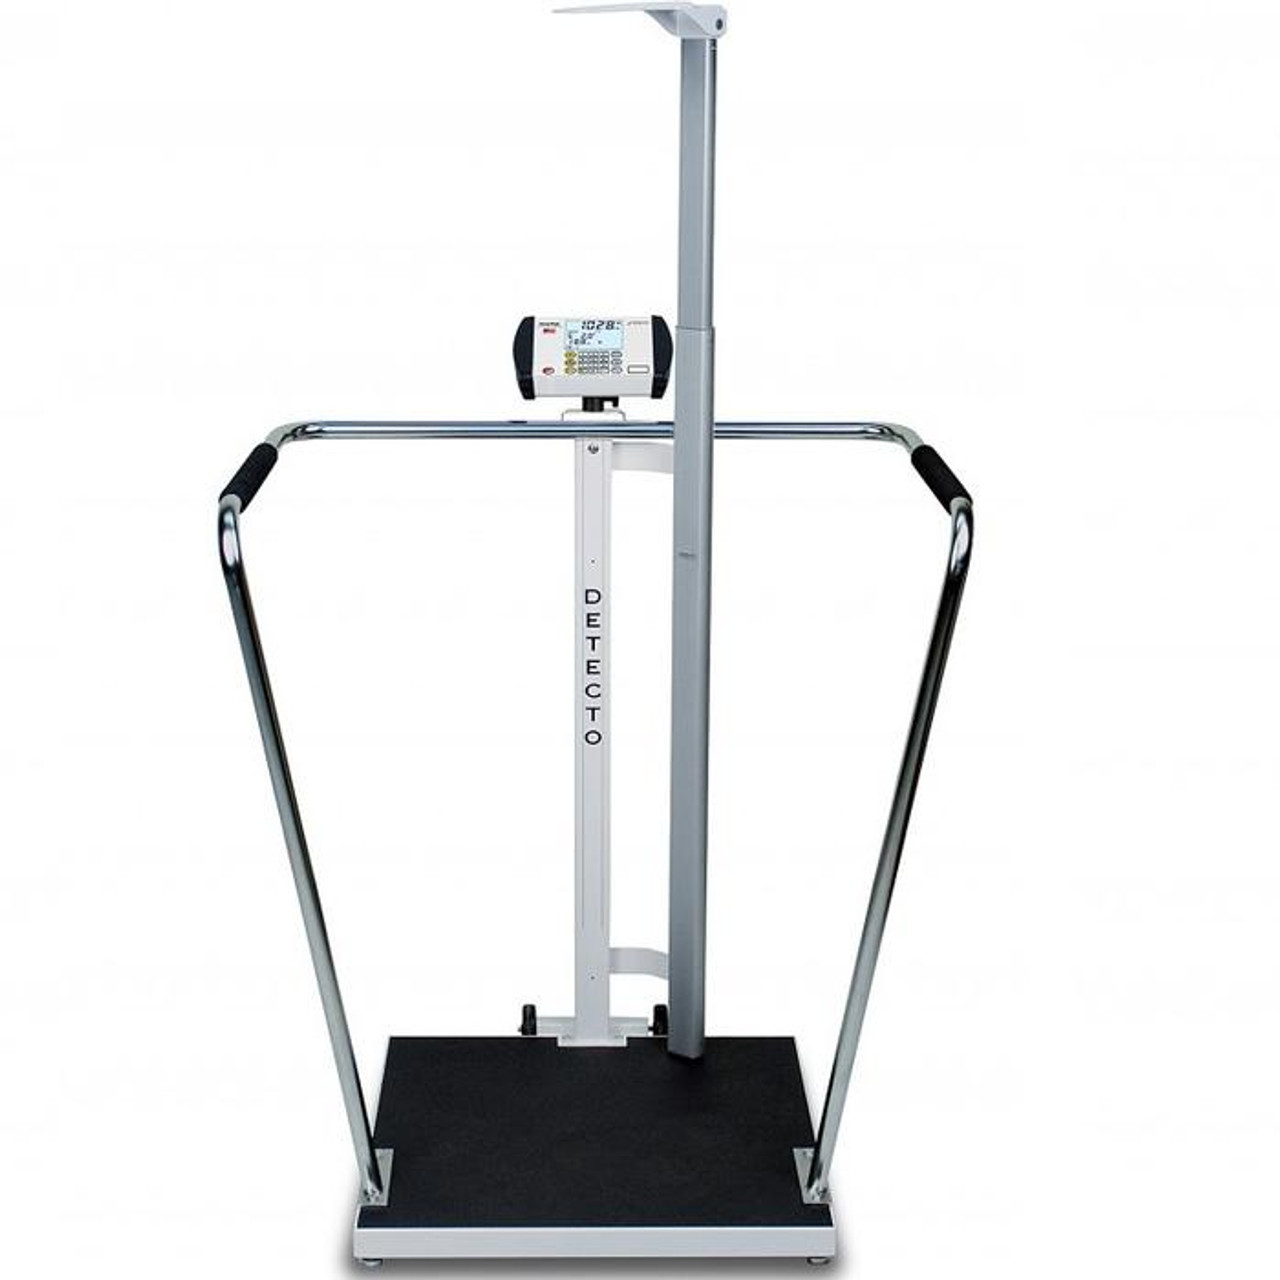 https://store.cevimed.com/images/stencil/1280x1280/products/123092/127499/Detecto_Bariatric_Scale_with_Digital_Height_Rod_600_lb_x_0.2_lb_-_270_kg_x_0.1_kg__07425__71729.1633715588.jpg?c=1